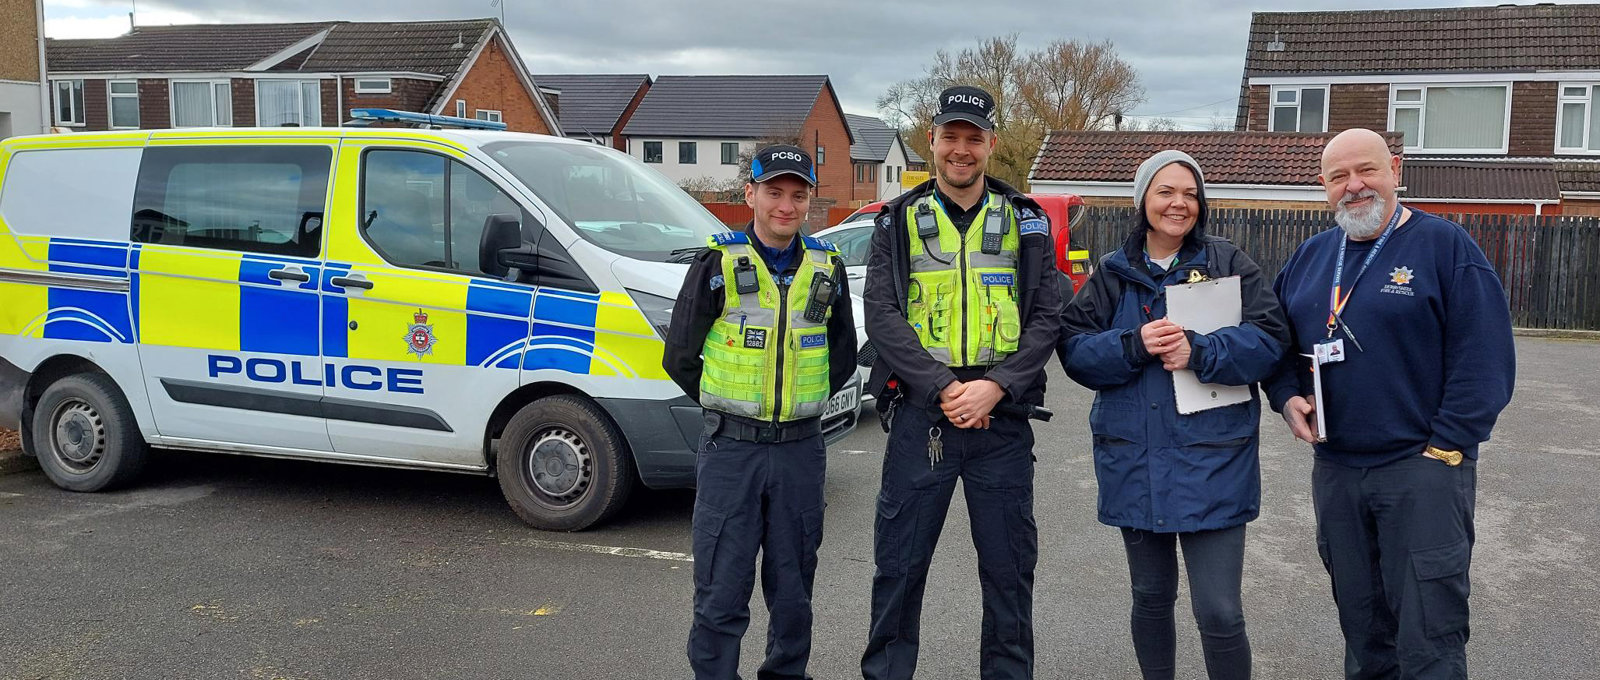 Photo of two Futures team members with two police officers, standing near some Futures homes with a police car in the background